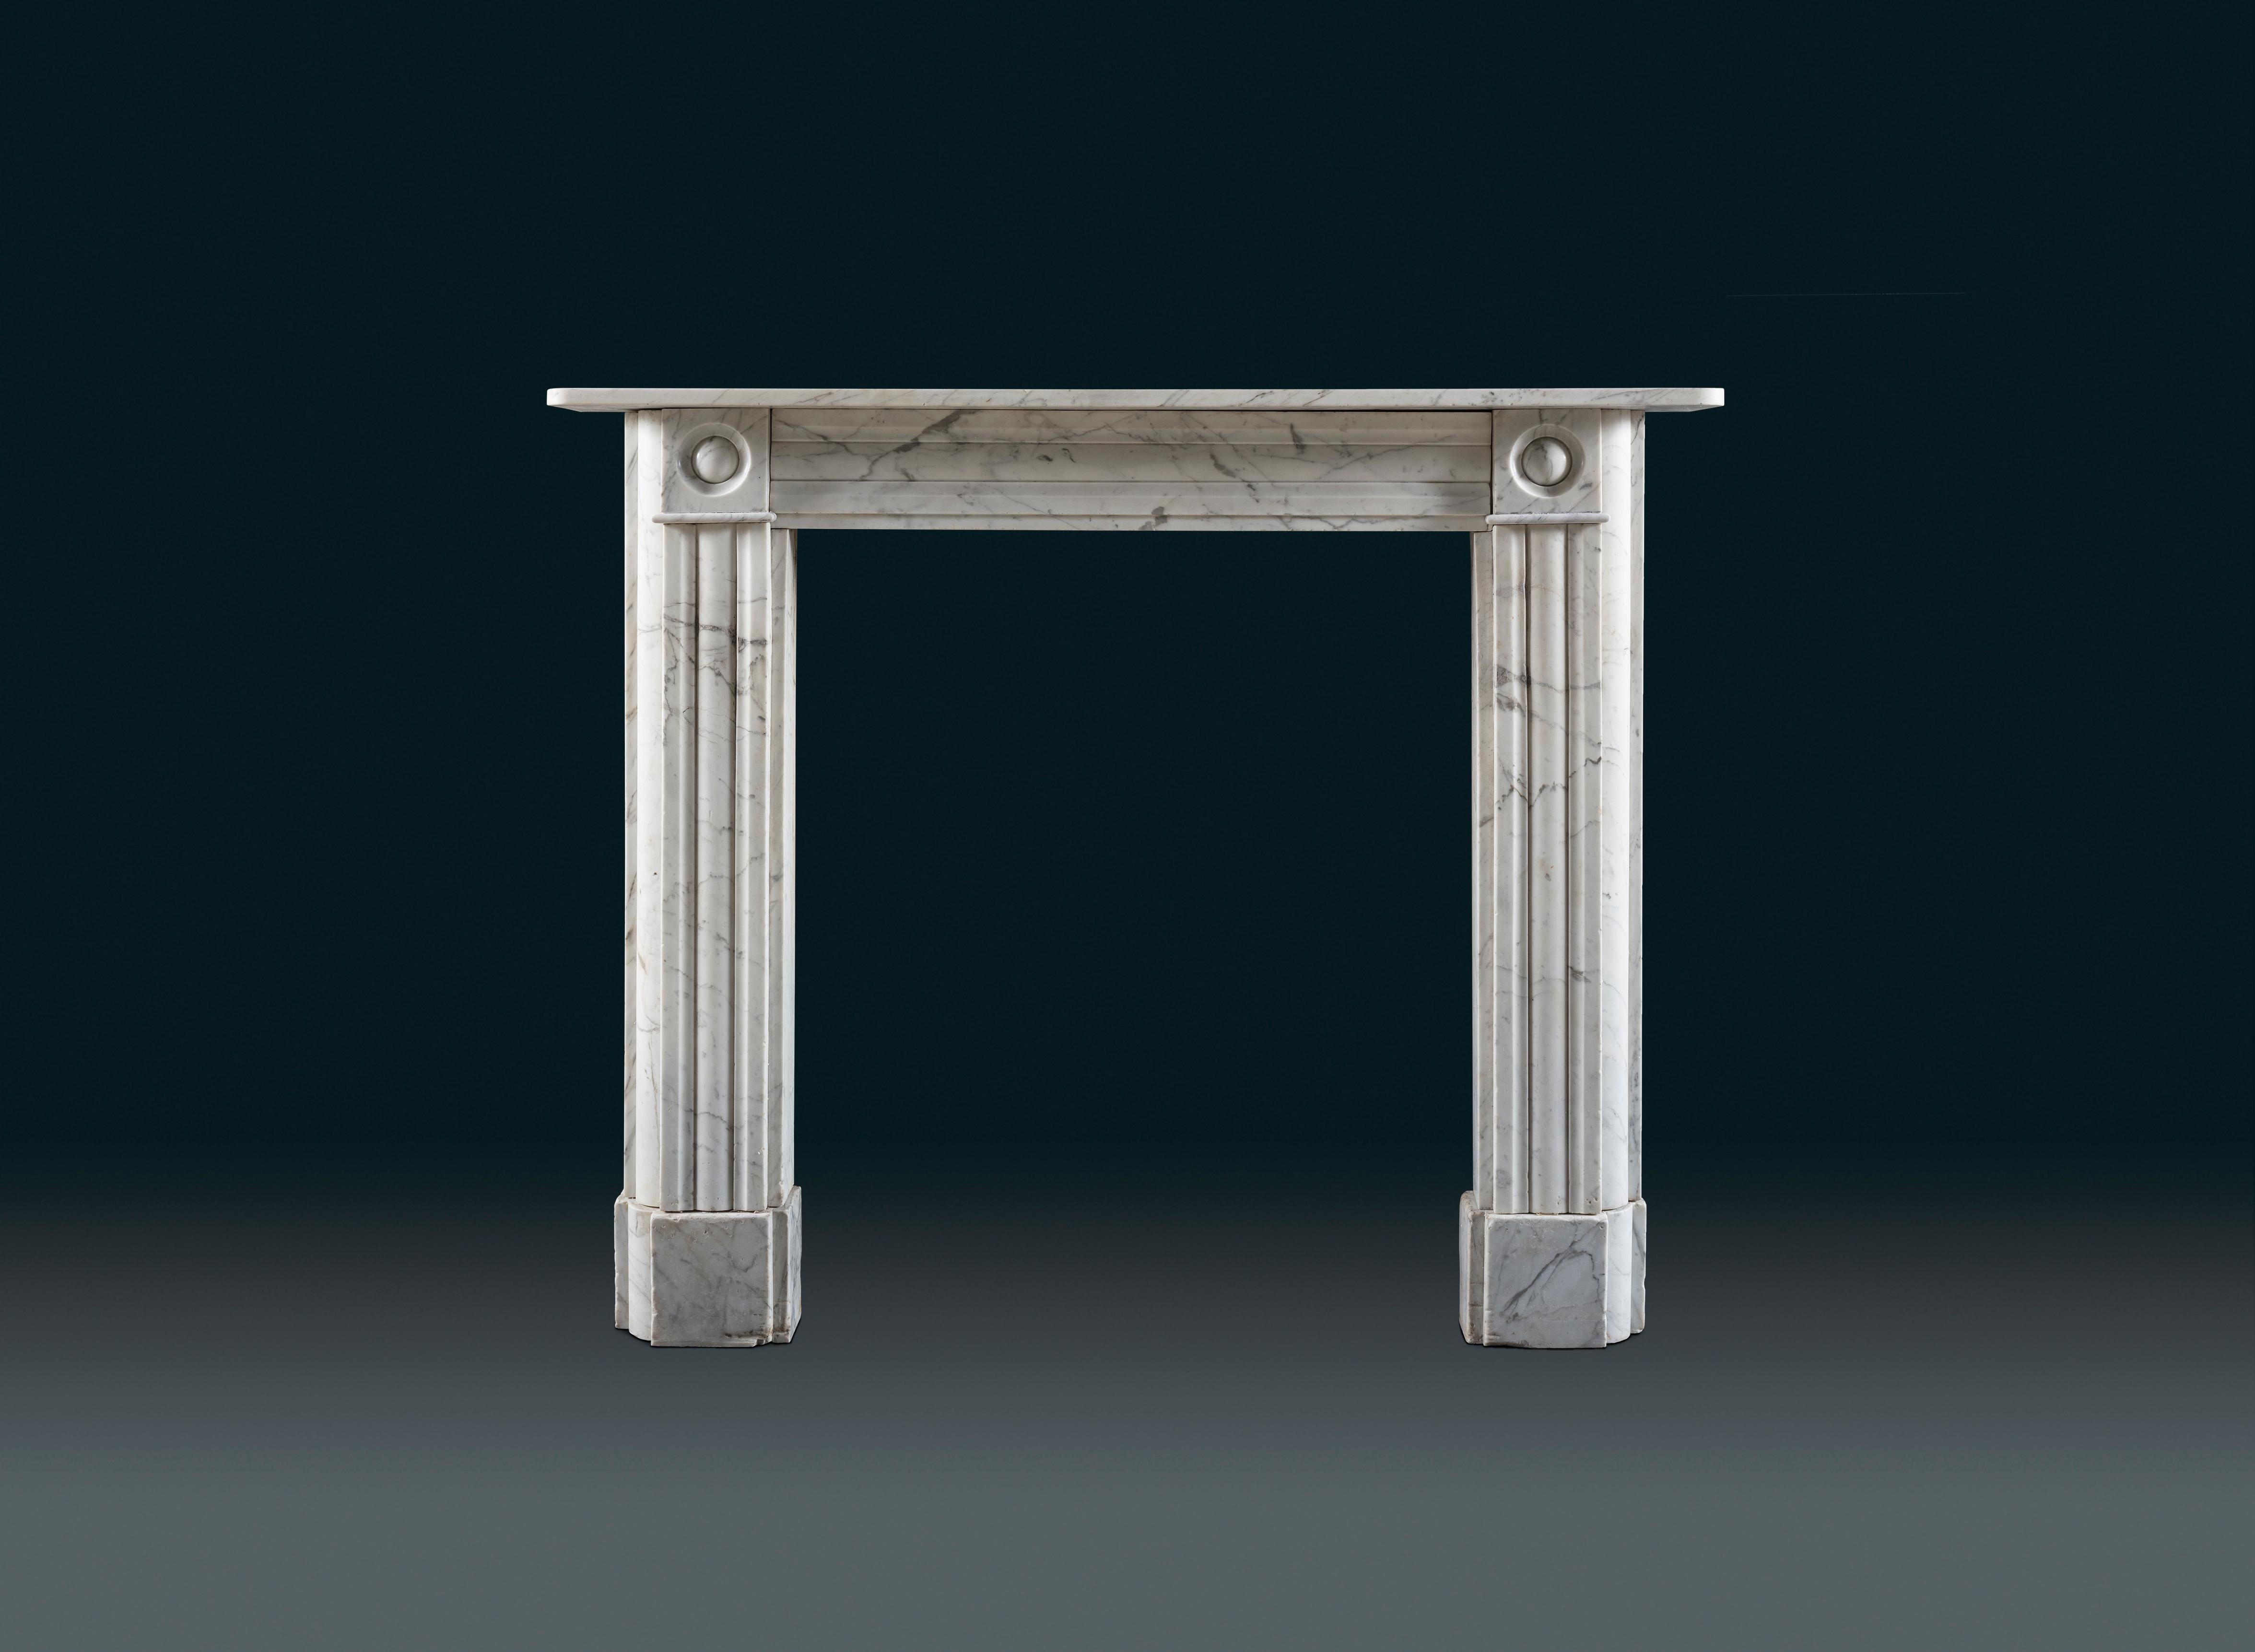 A near pair of classic Regency Bullseye chimneypiece of gracious proportions carved in Carrara marble.
The simple shelf sits above finely carved bullseye end-blocks, flanking a plain panelled frieze and supported by rounded, reeded jambs.
Both